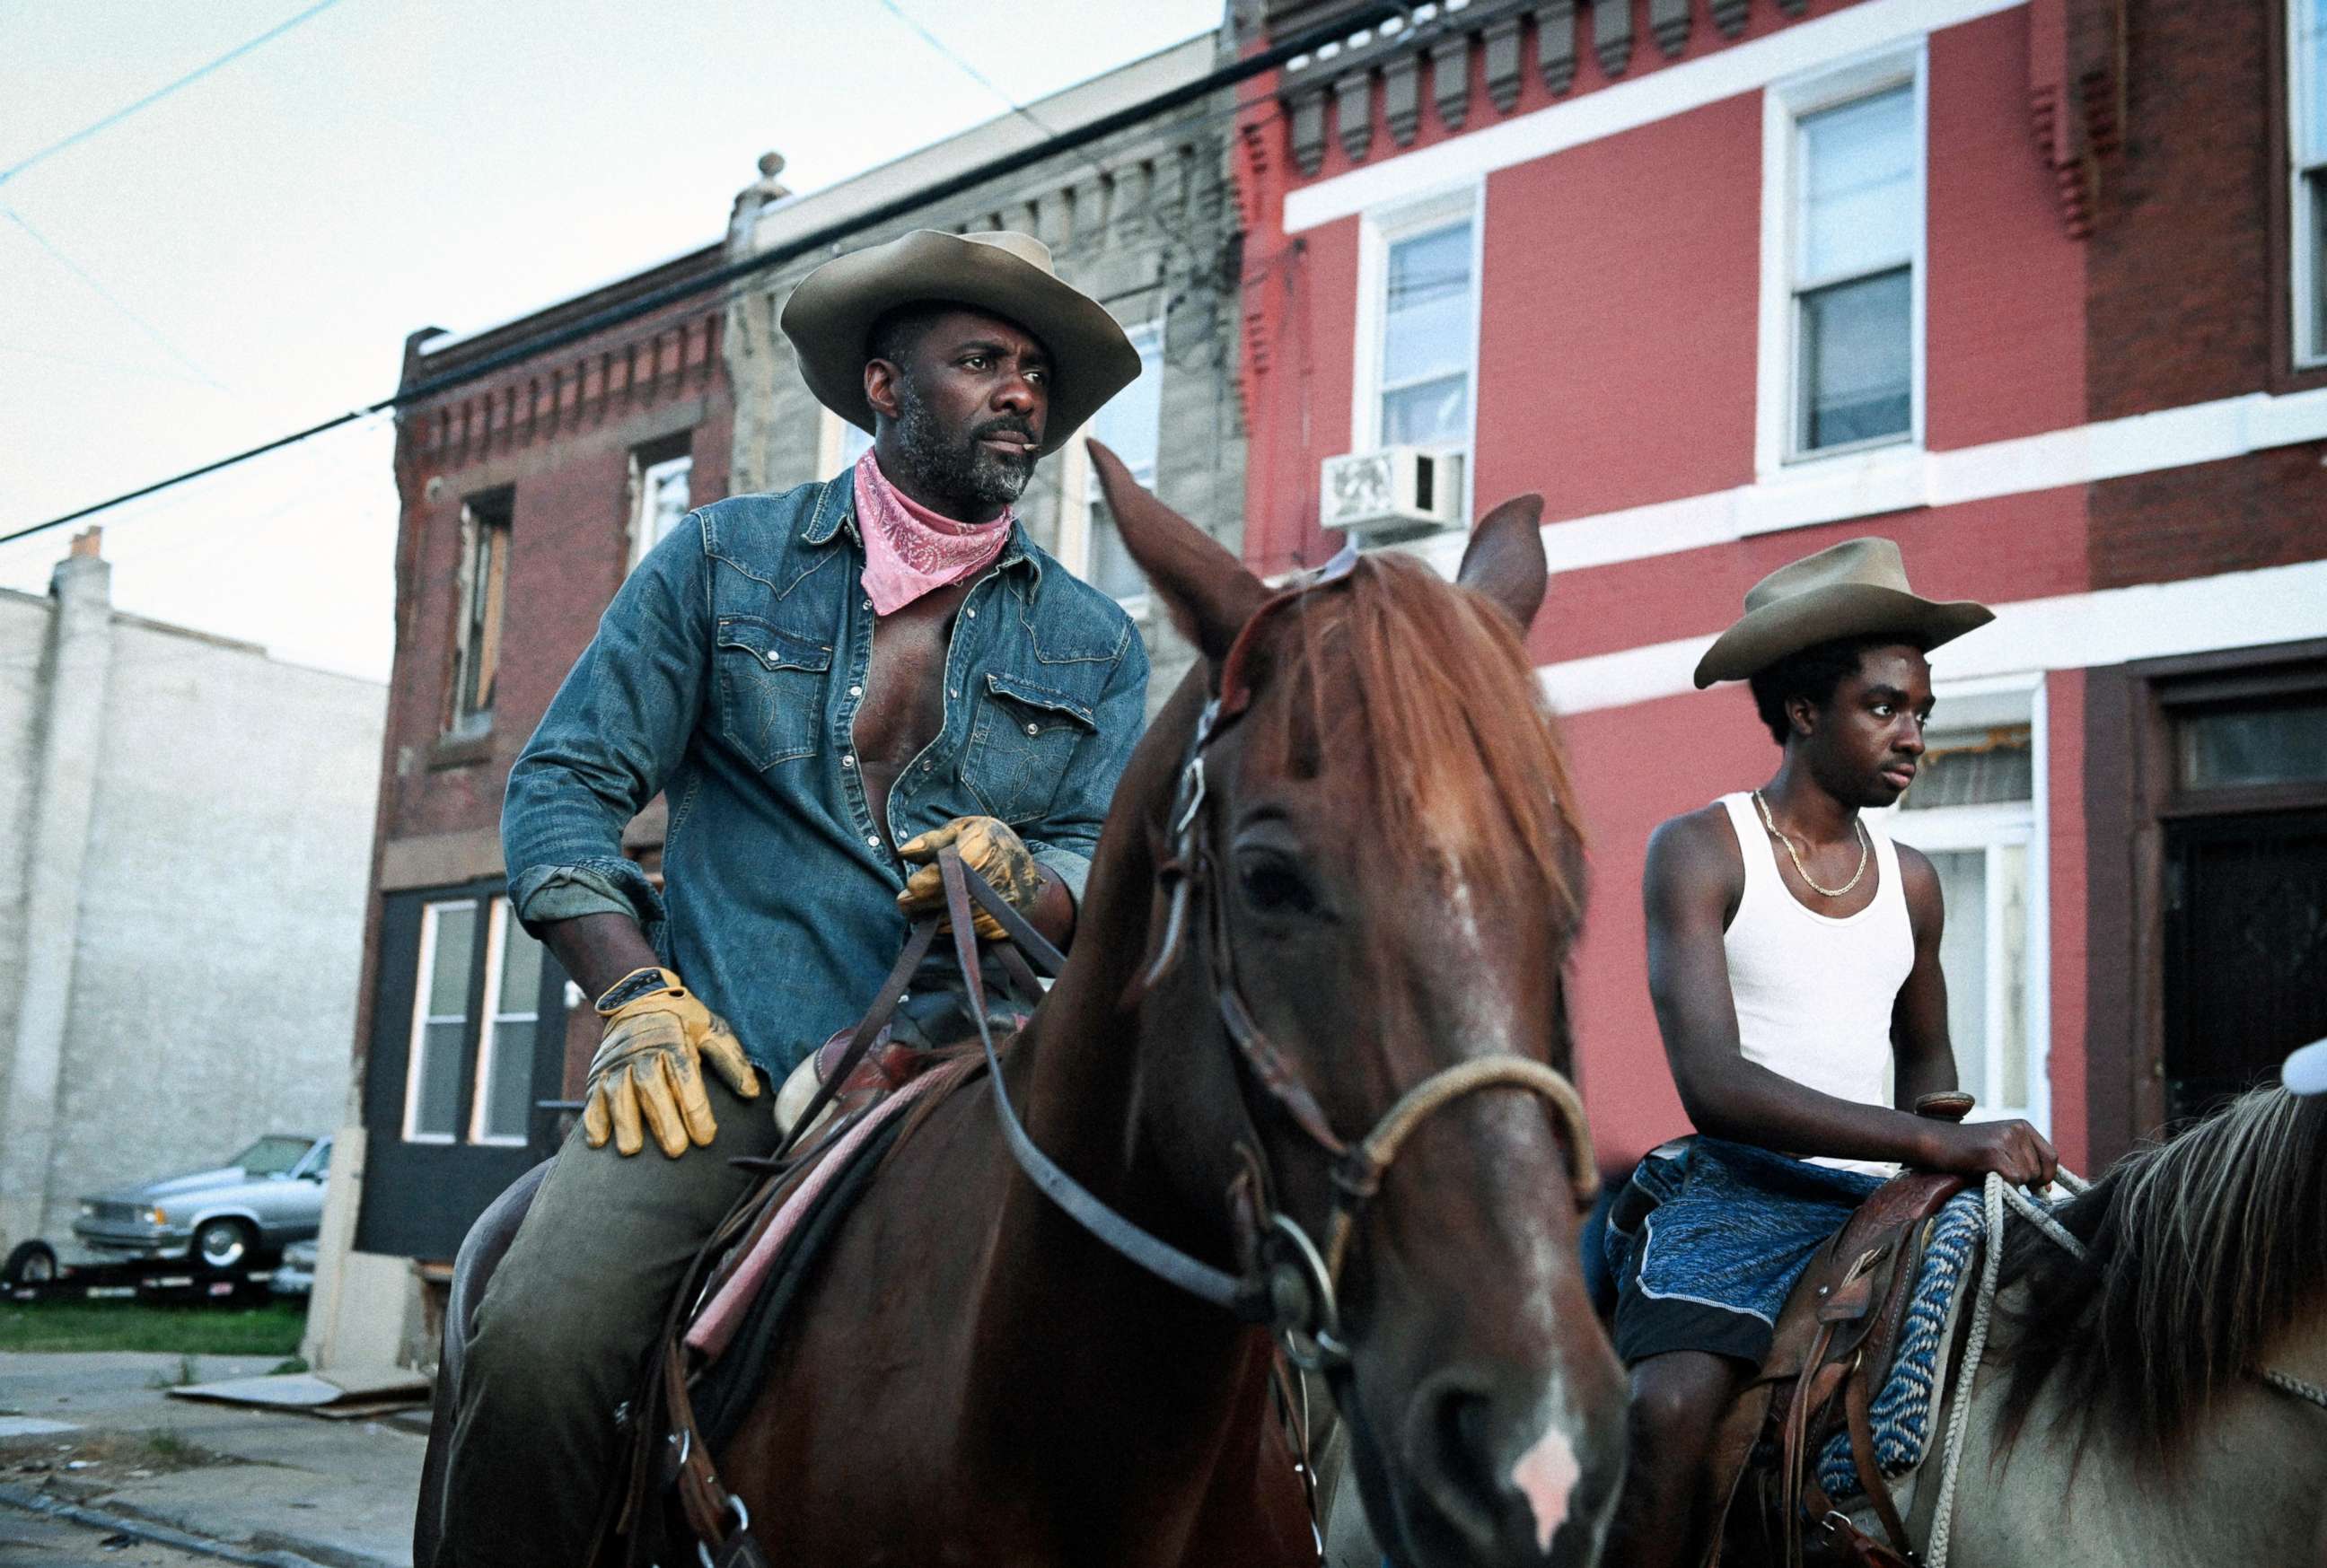 PHOTO: Idris Elba, left, and Caleb McLaughlin in a scene from the film "Concrete Cowboy."